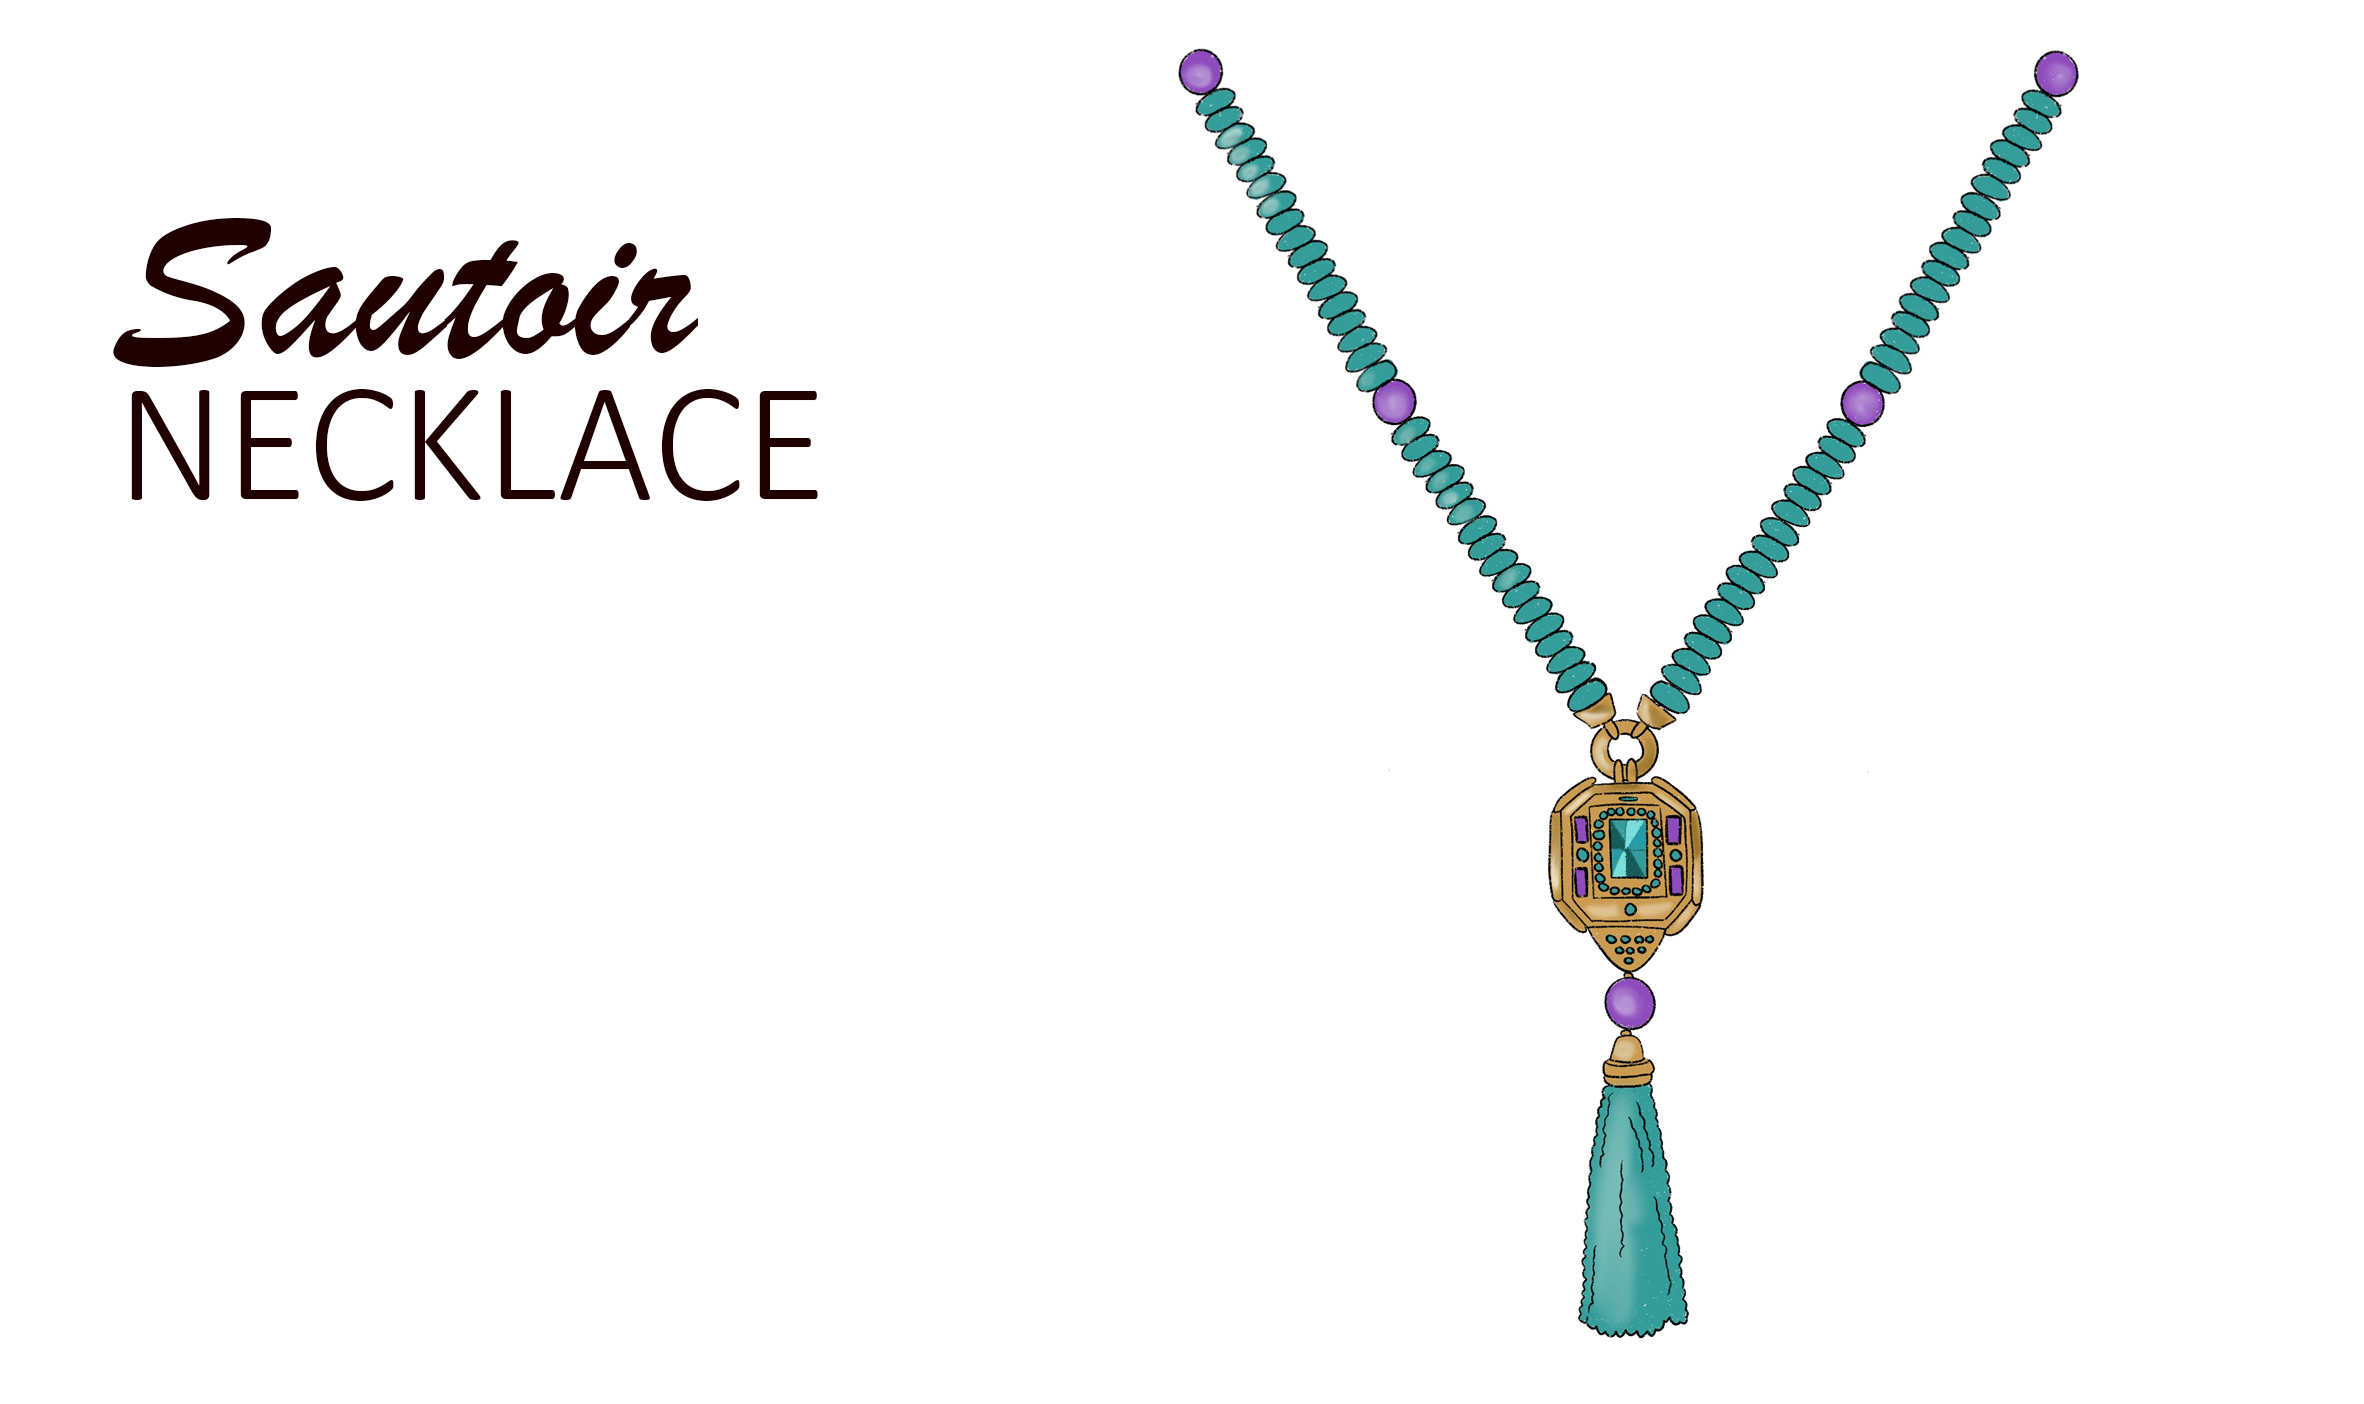 29 Different Types of Necklaces - The Ultimate Guide